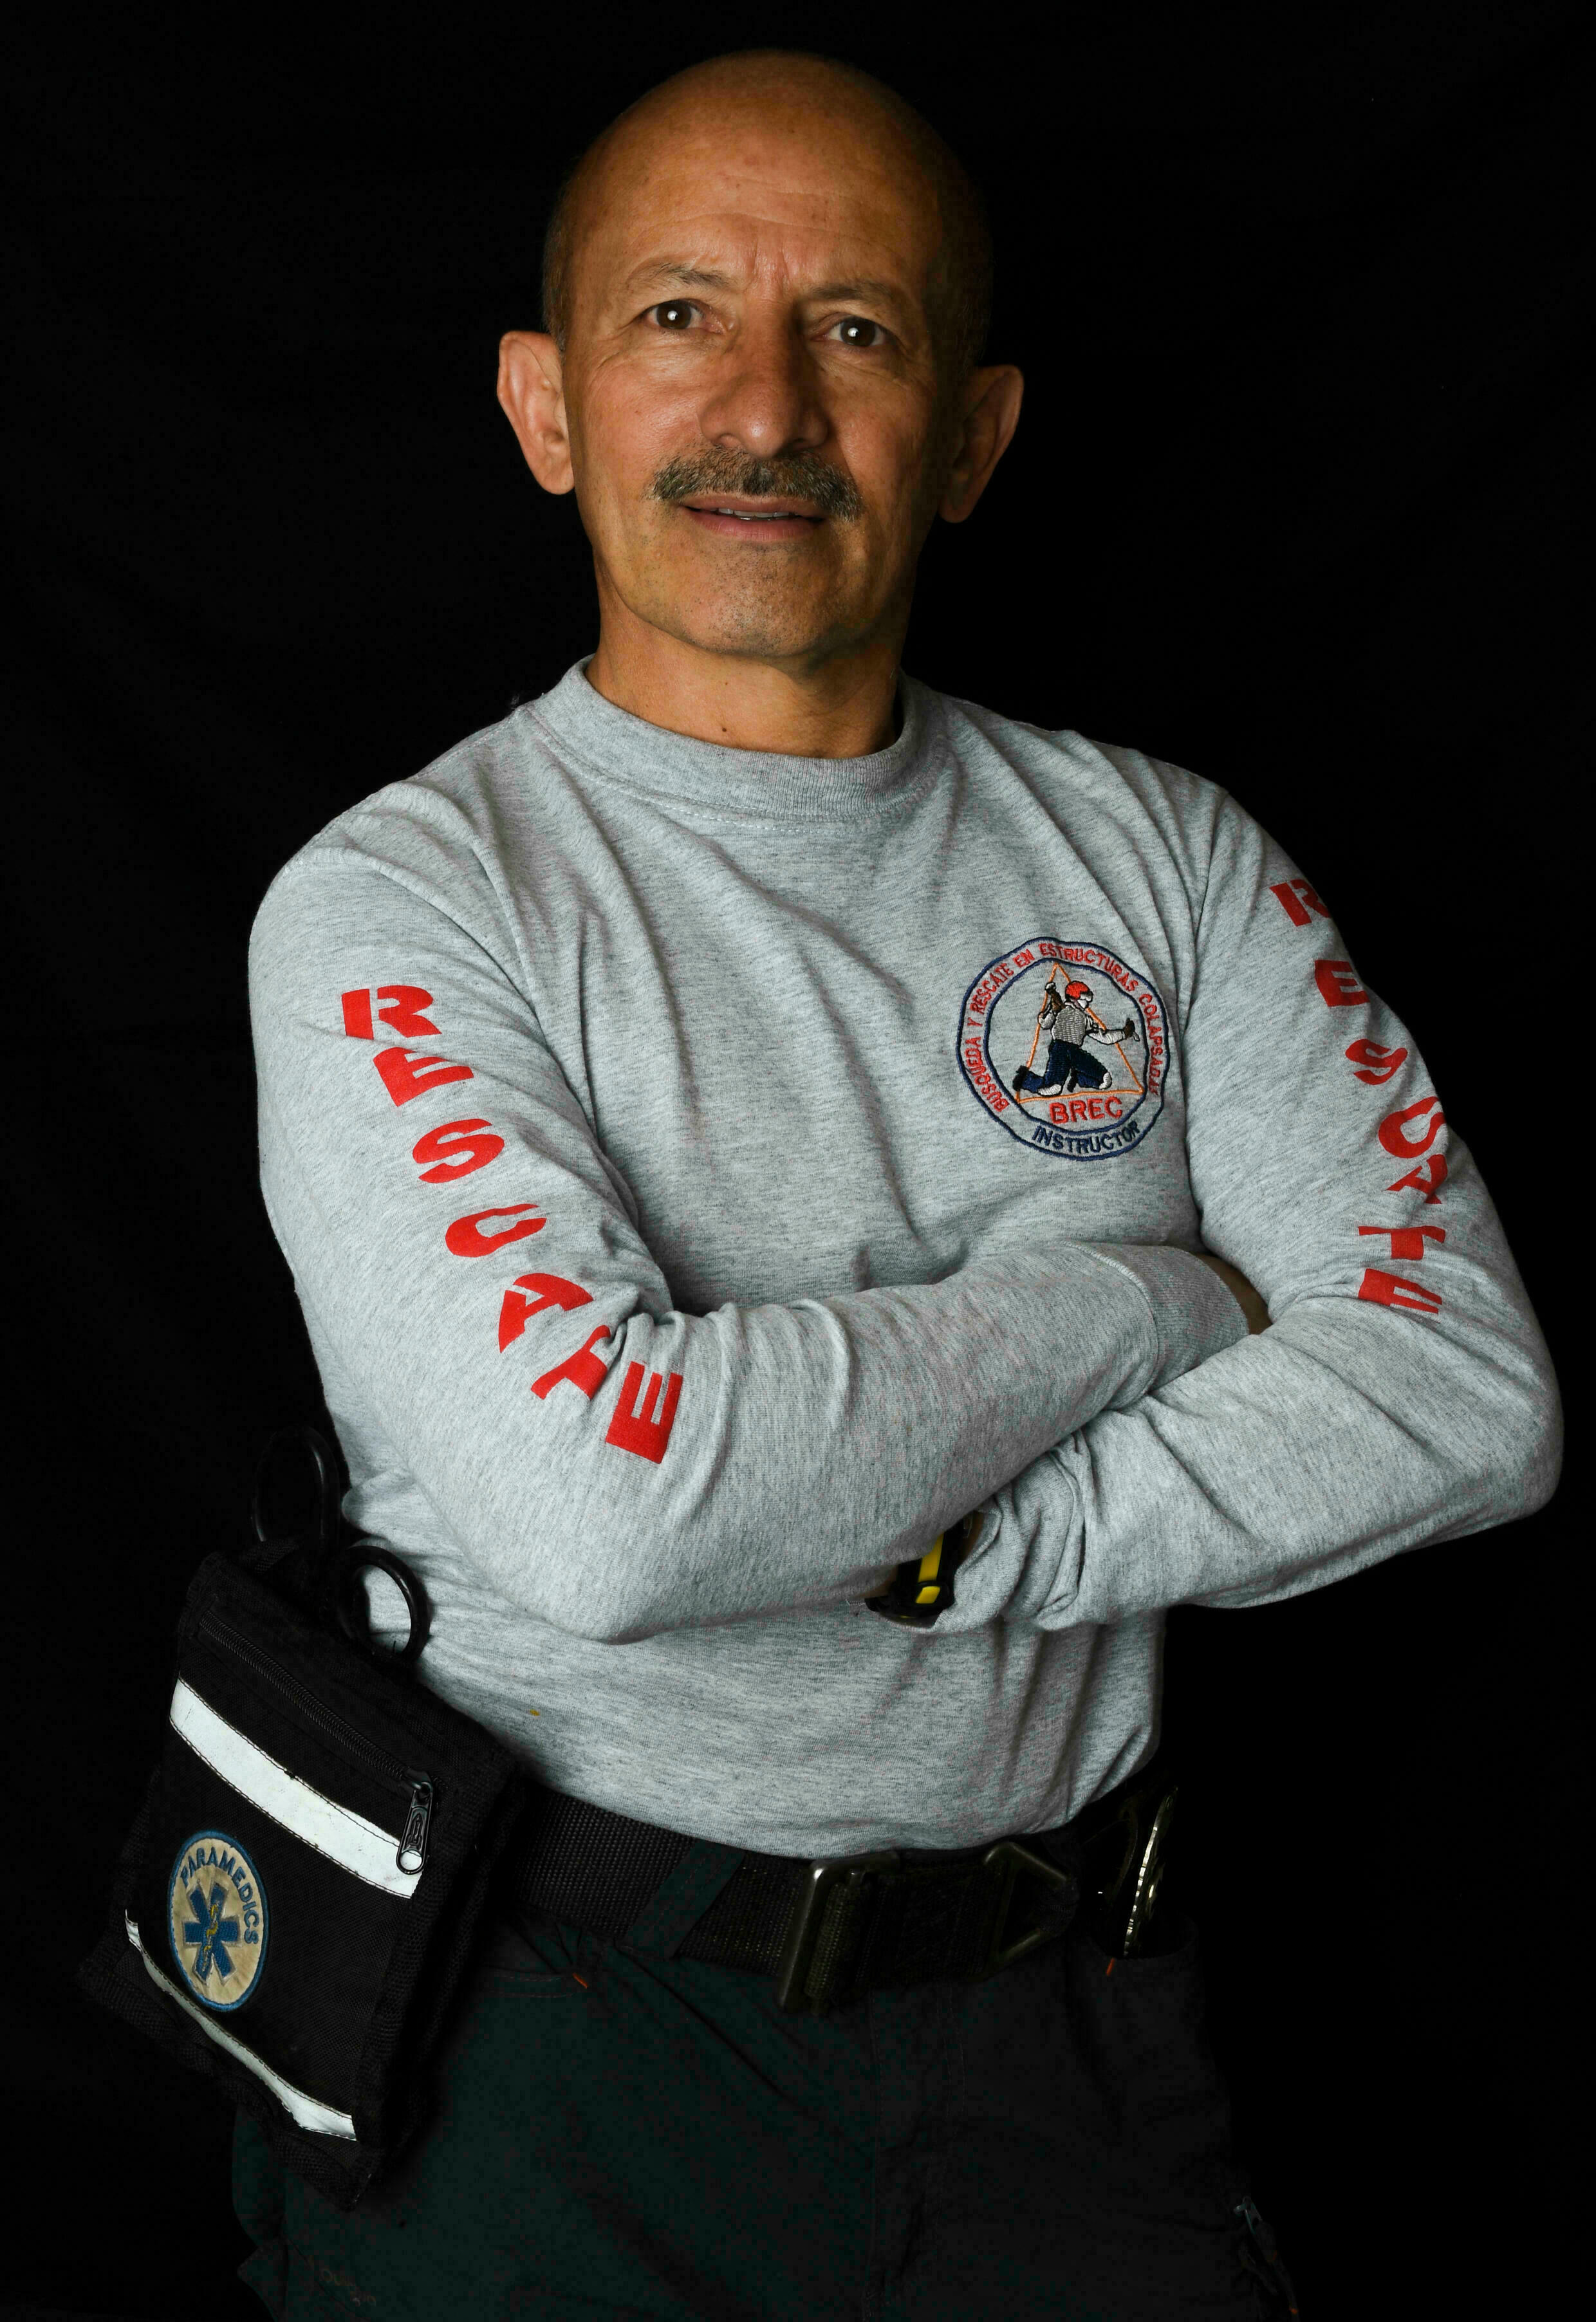 Feeling "The pain of a homeland, even if it is not my homeland (...) and this continues"Colombian firefighter Luis Eduardo Marulanda says two decades after the attacks on the Twin Towers in New York